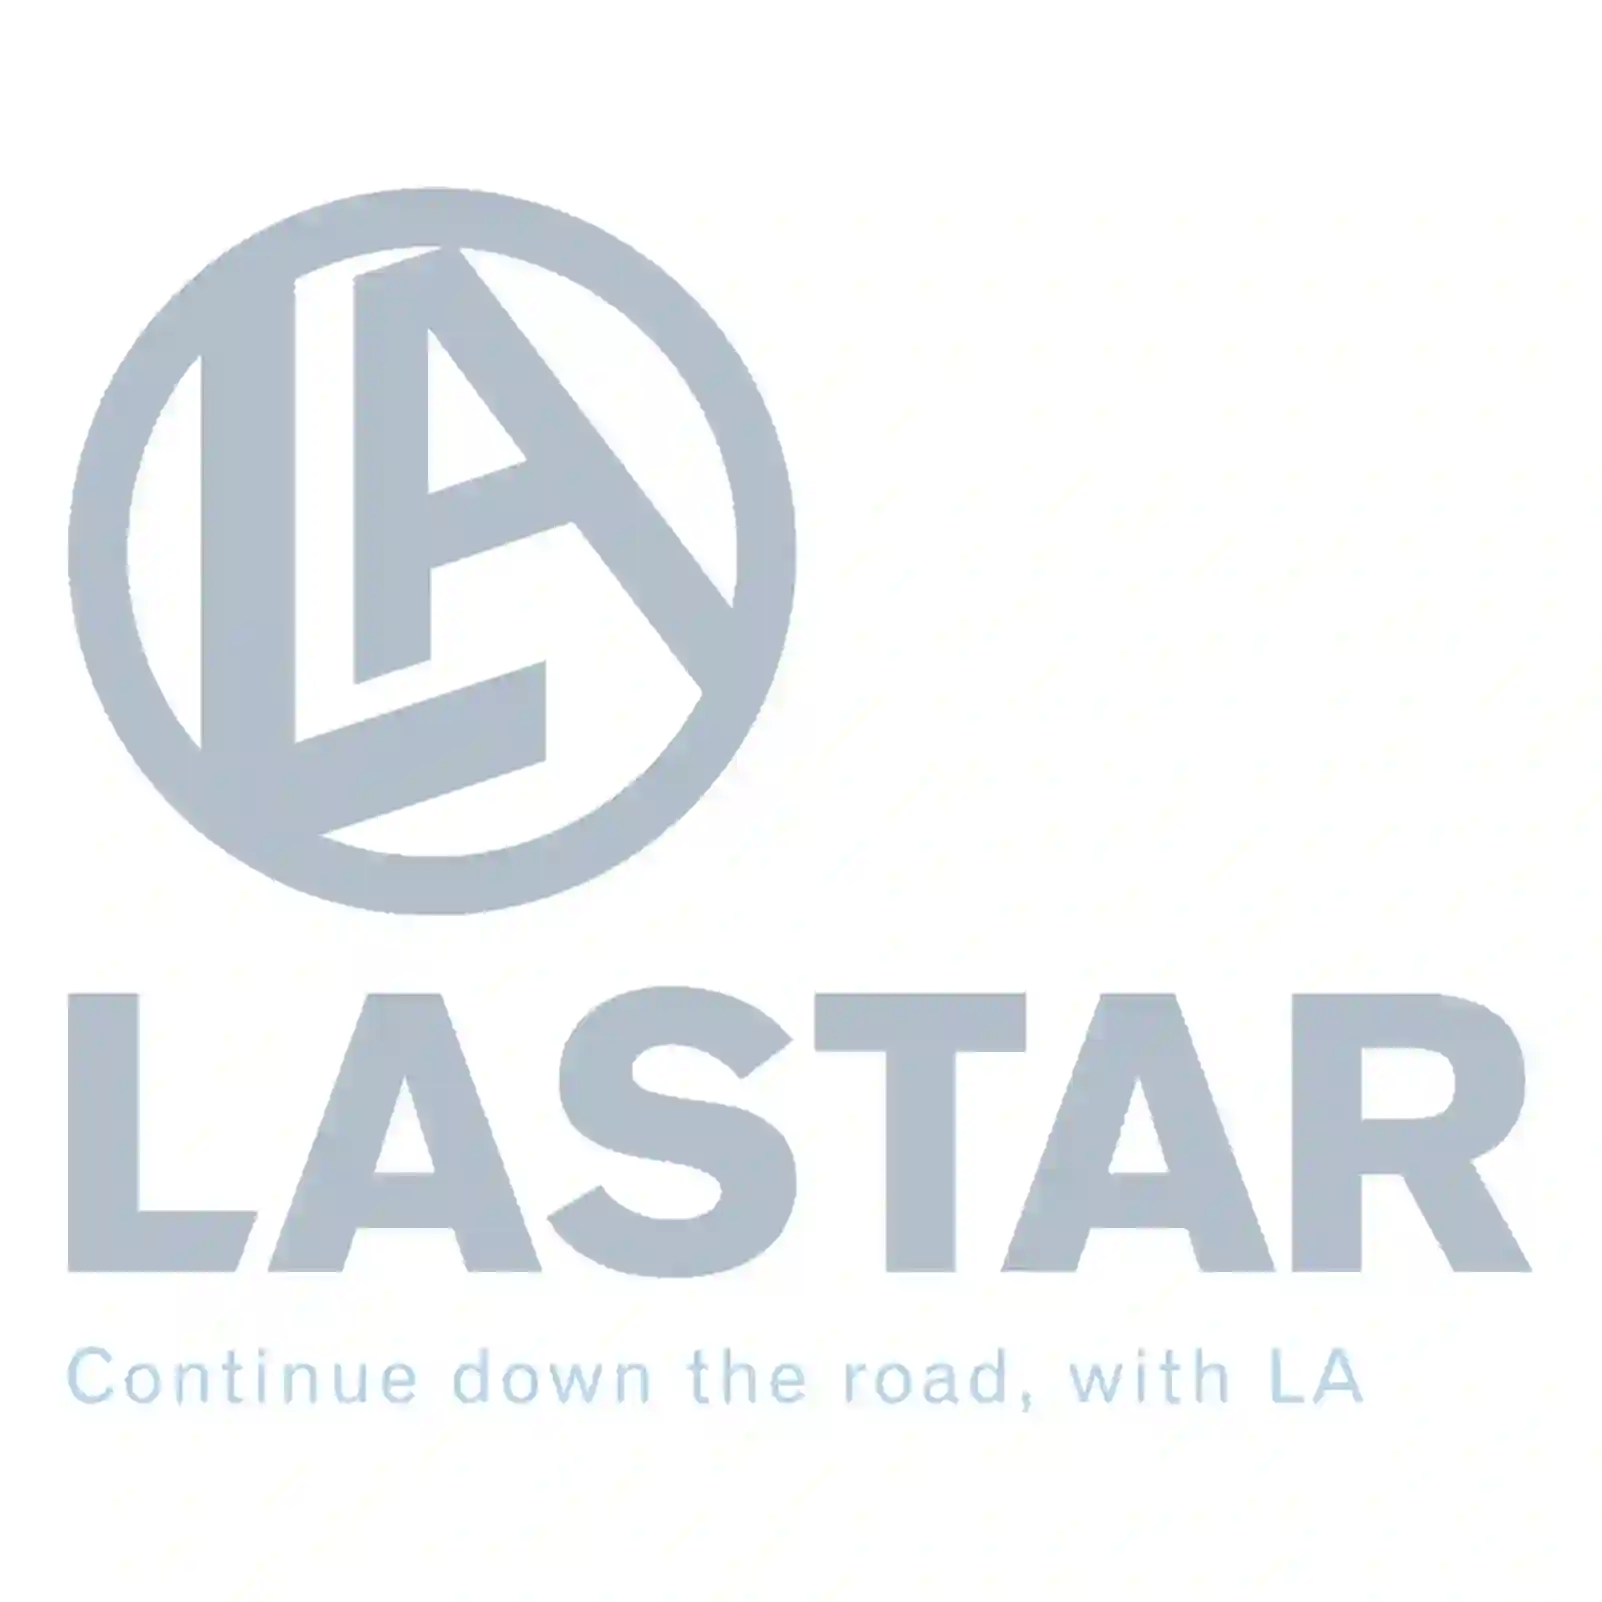 Step, left, 77719832, 1994786 ||  77719832 Lastar Spare Part | Truck Spare Parts, Auotomotive Spare Parts Step, left, 77719832, 1994786 ||  77719832 Lastar Spare Part | Truck Spare Parts, Auotomotive Spare Parts